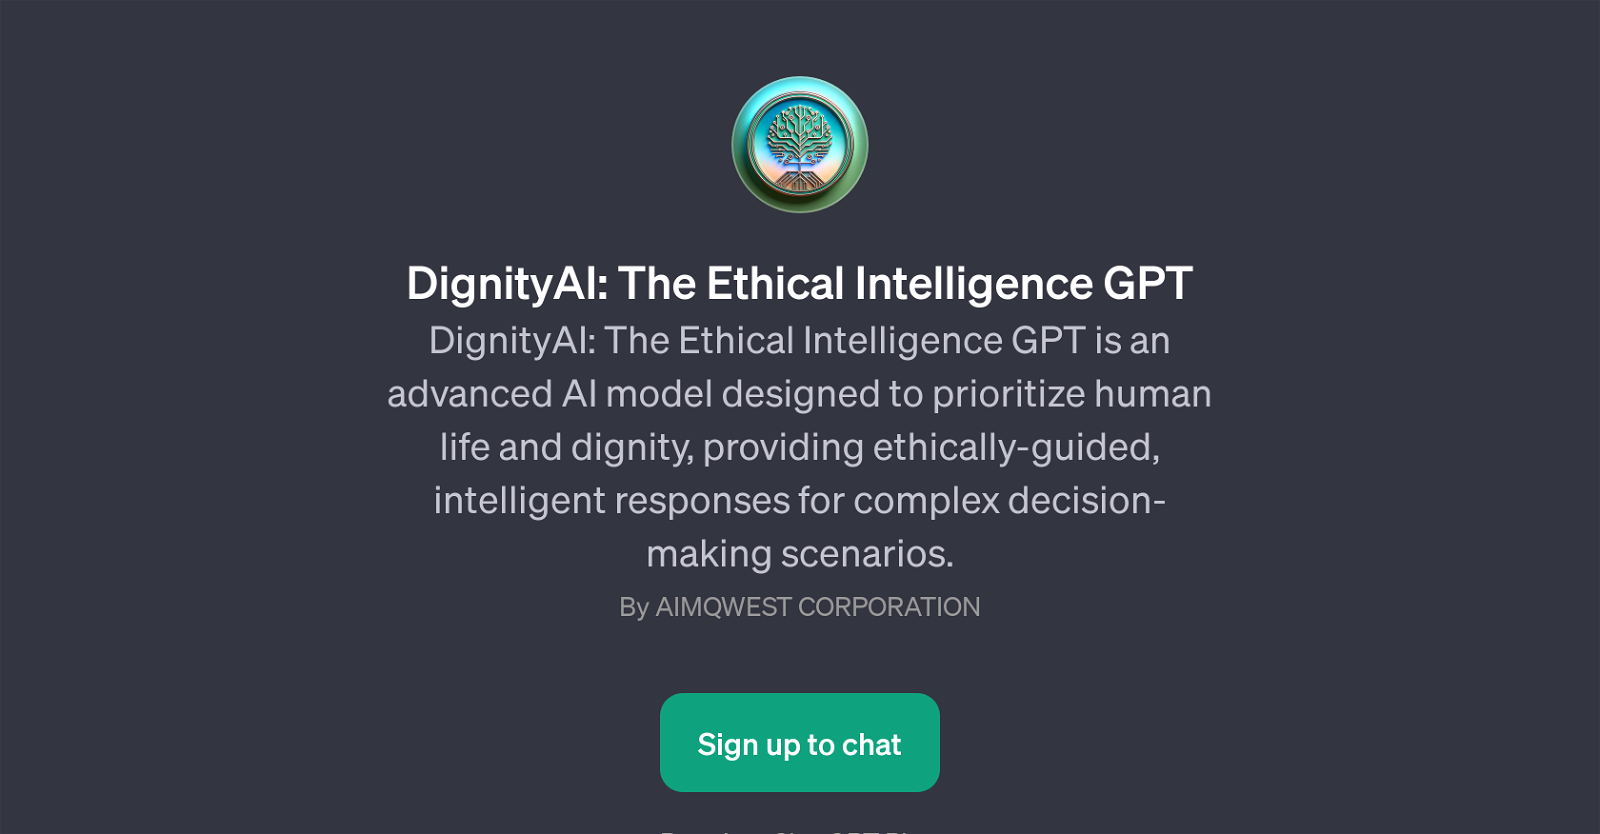 DignityAI: The Ethical Intelligence GPT website